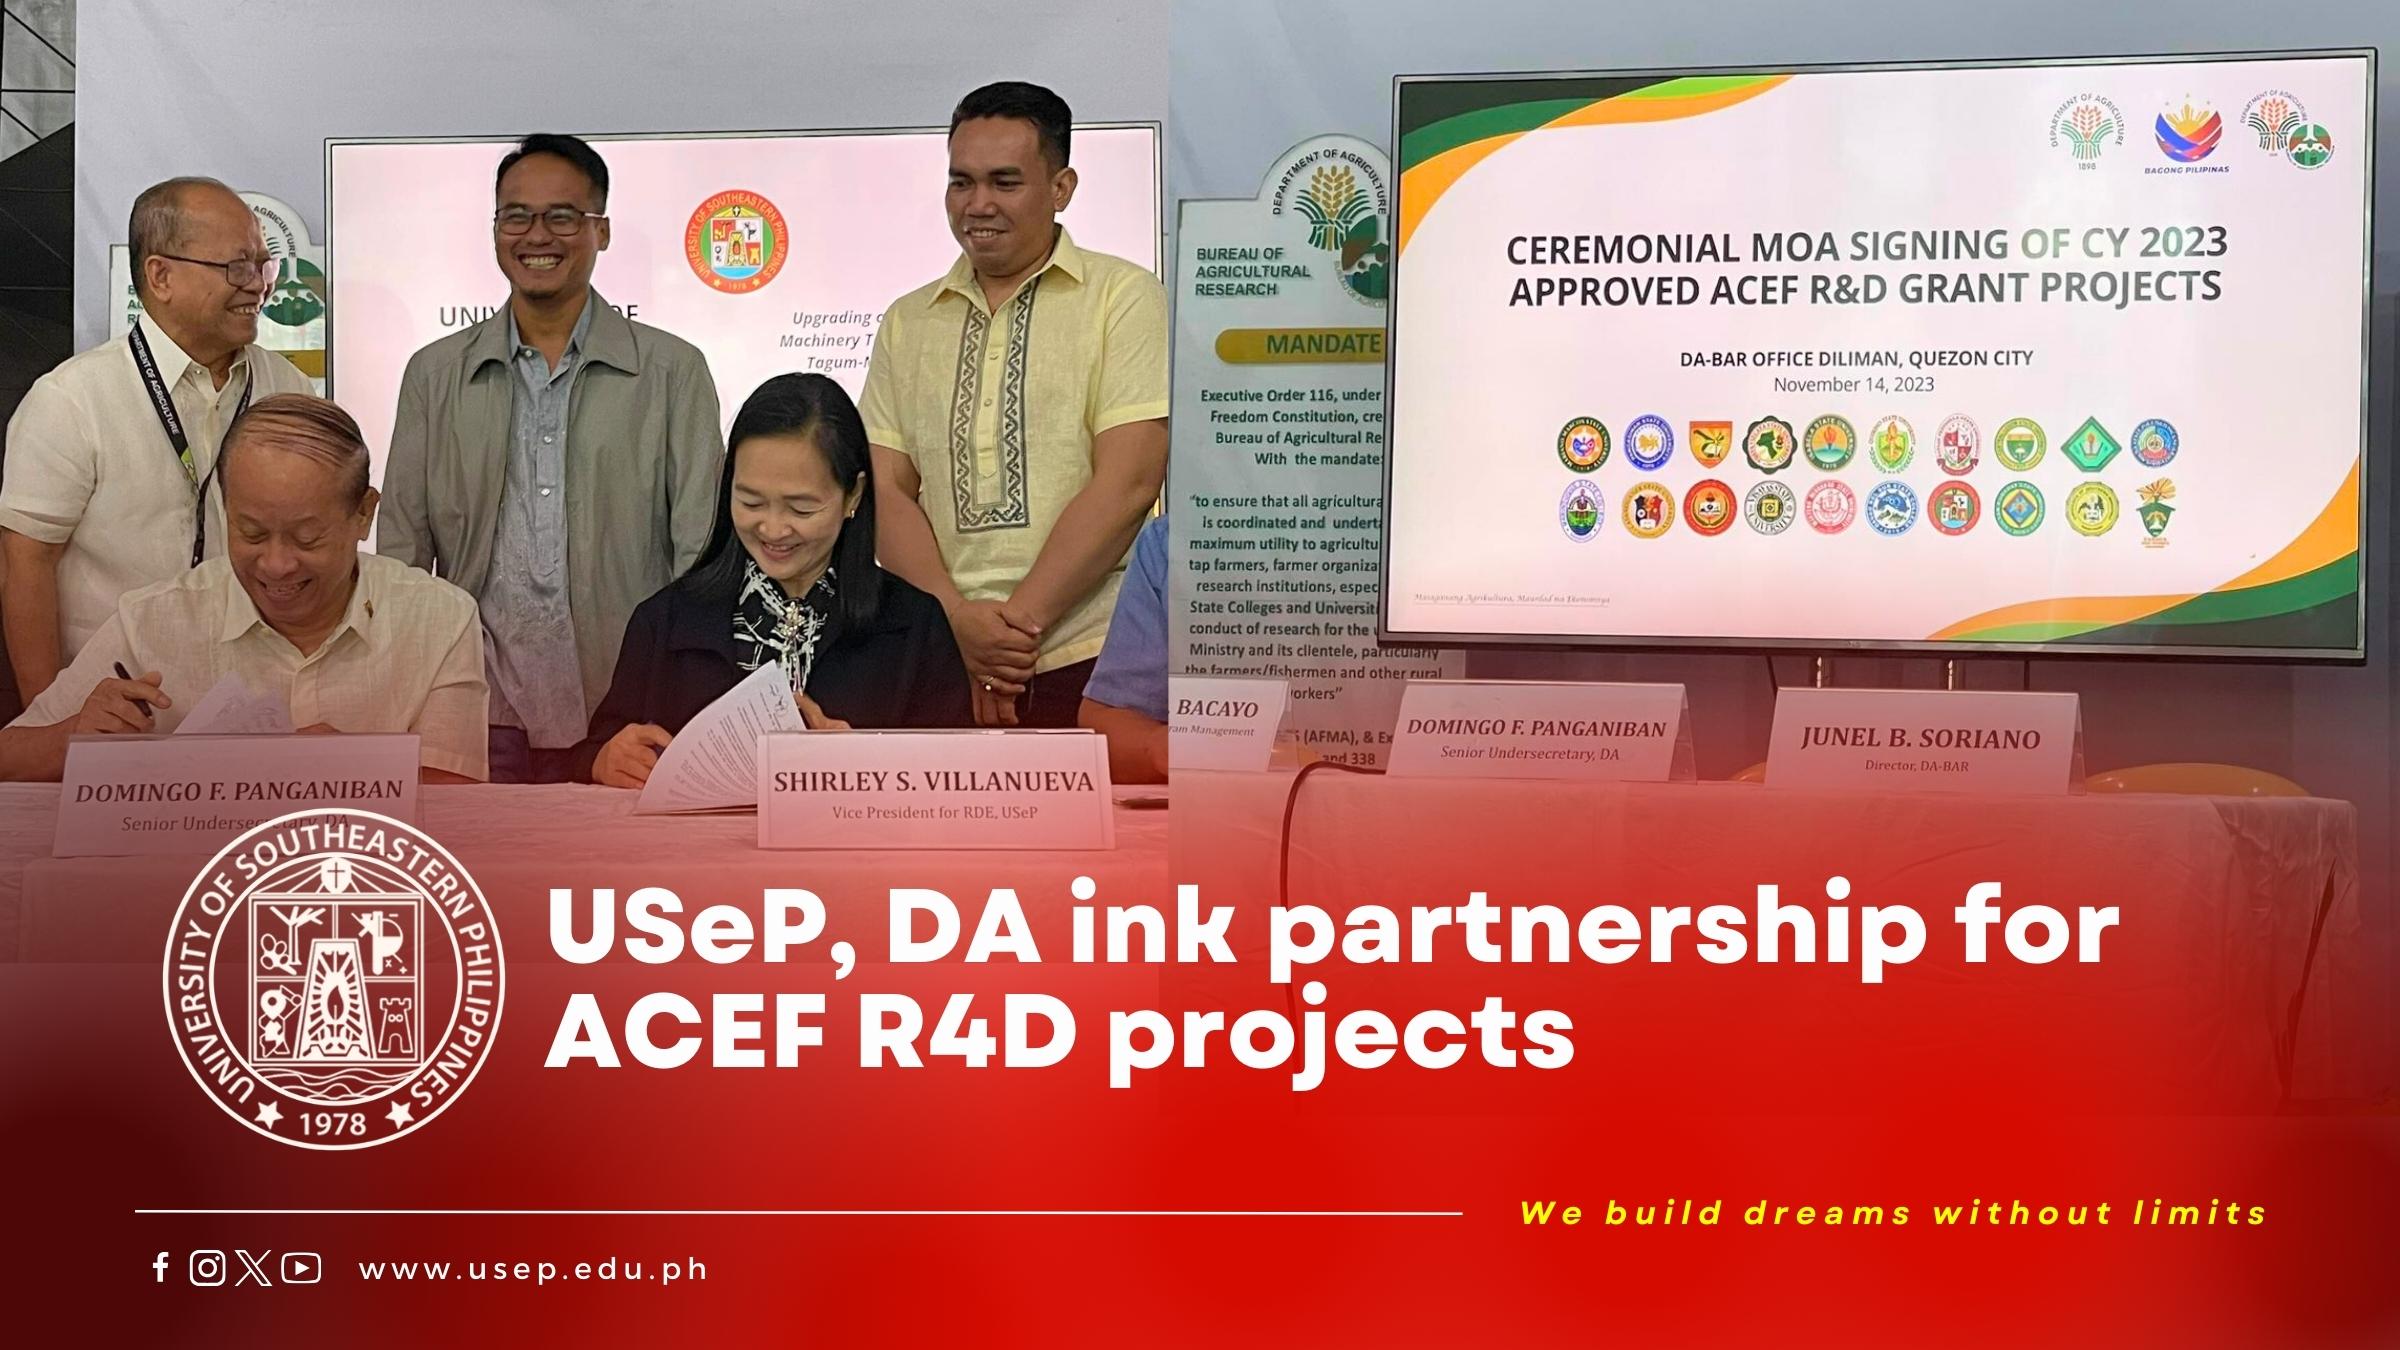 USeP, DA ink partnership for ACEF R4D projects